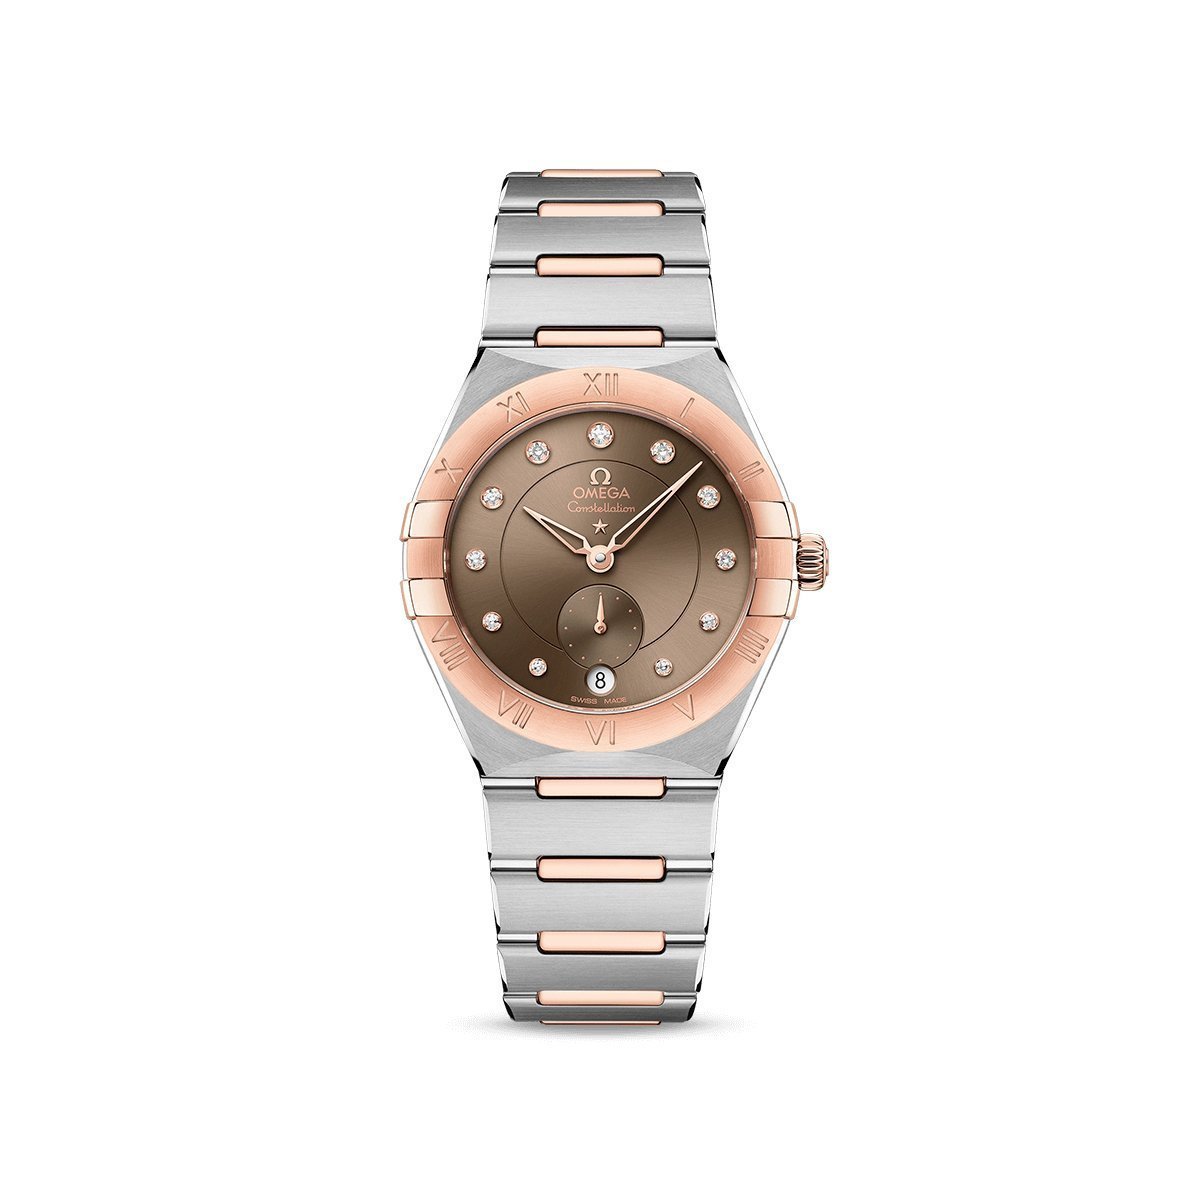 Constellation Small Seconds Automatic 34mm Watch